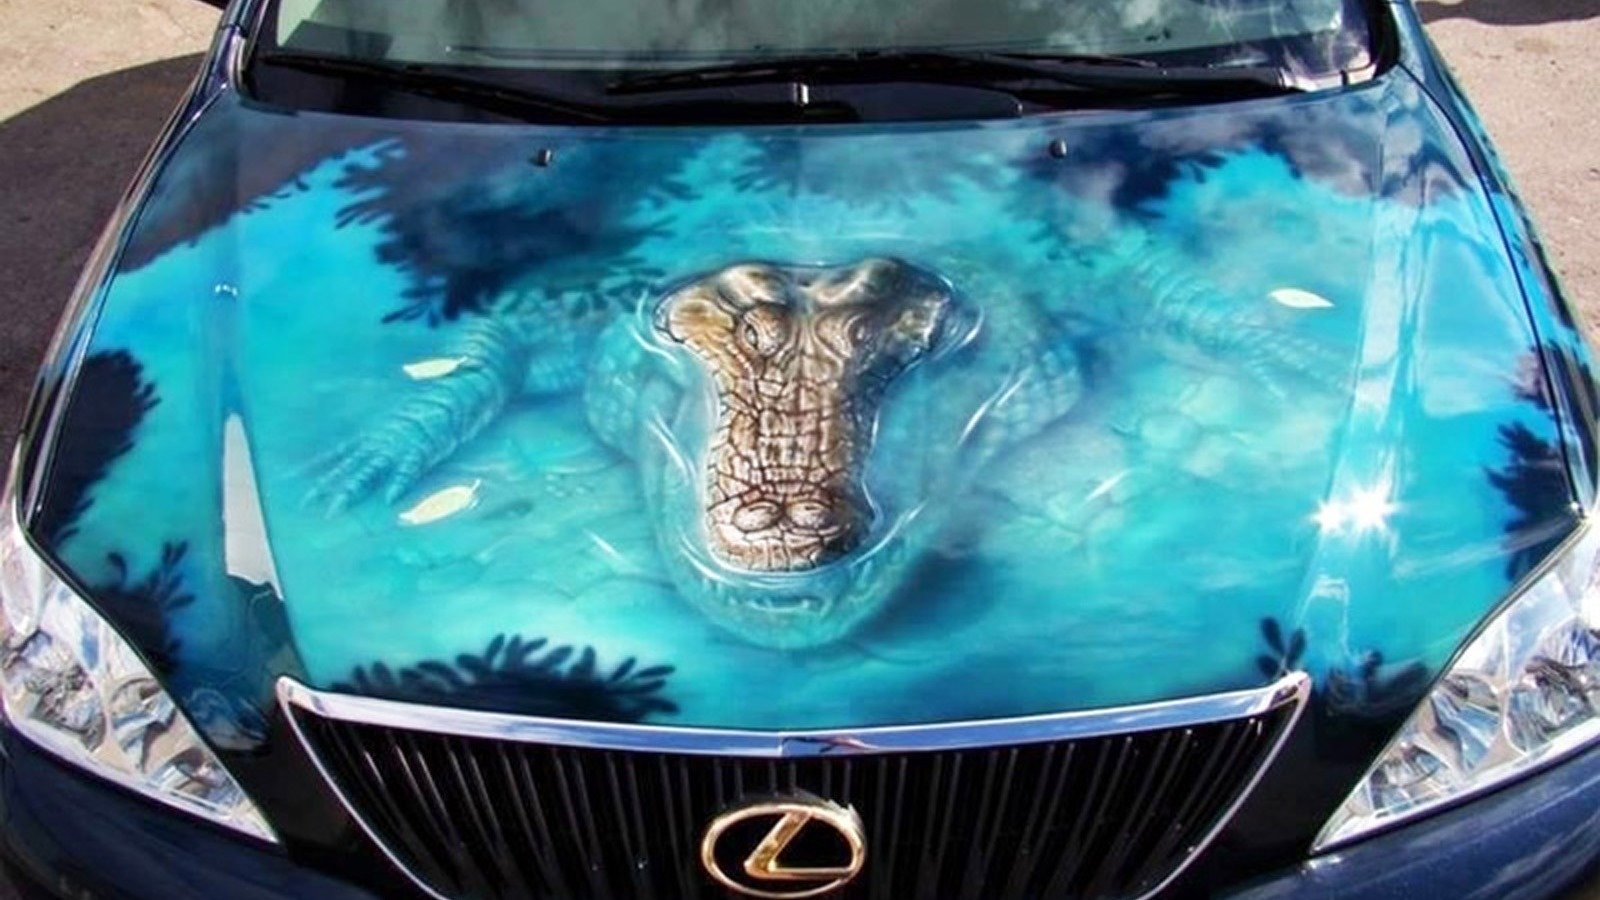 alligator coming out of the water airbrushed onto a hood of a lexus